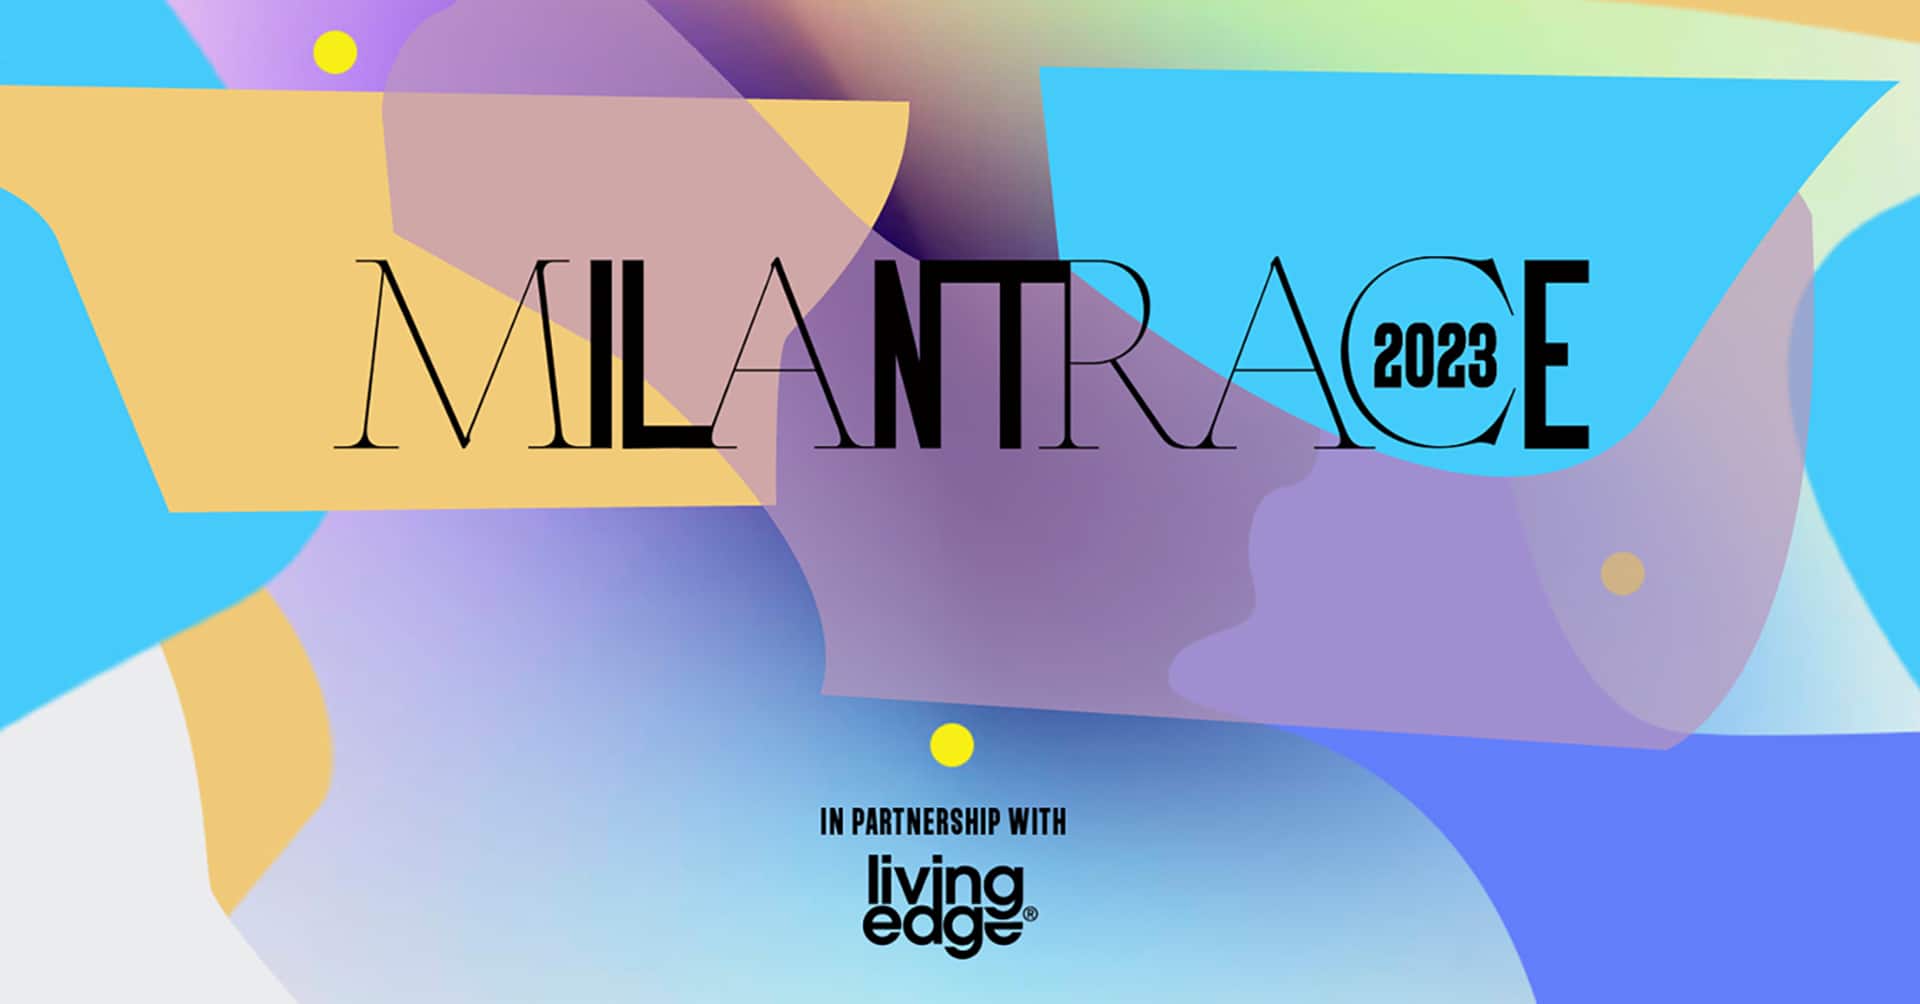 MilanTrace presented by Living Edge 